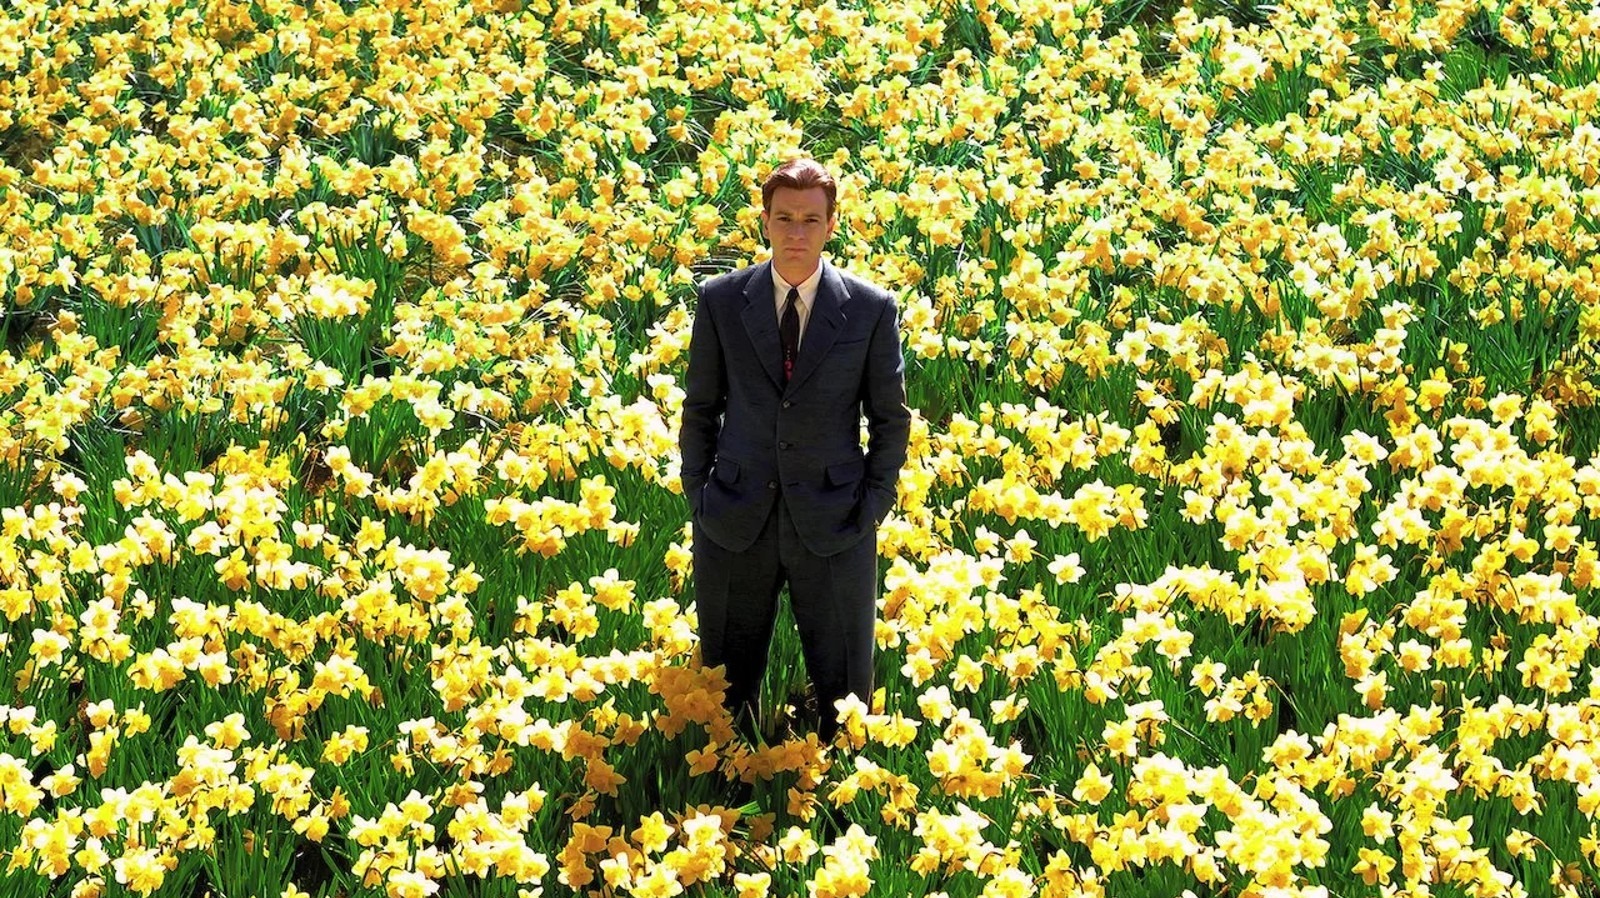 #Big Fish Is A Beautiful Story About The Beauty Of Stories